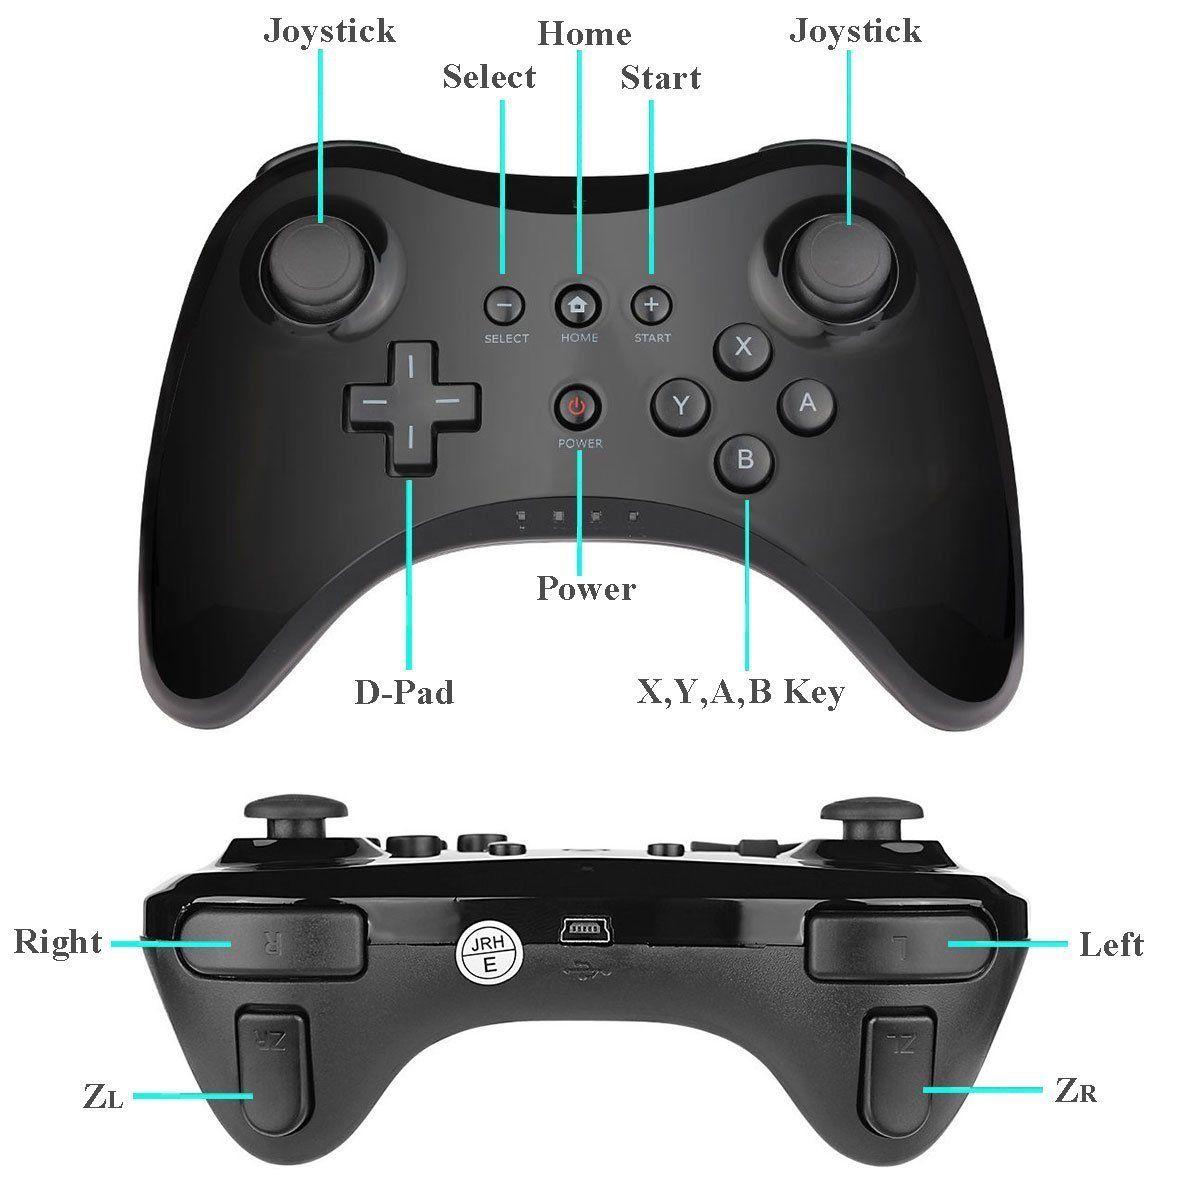 where to buy wii u pro controller